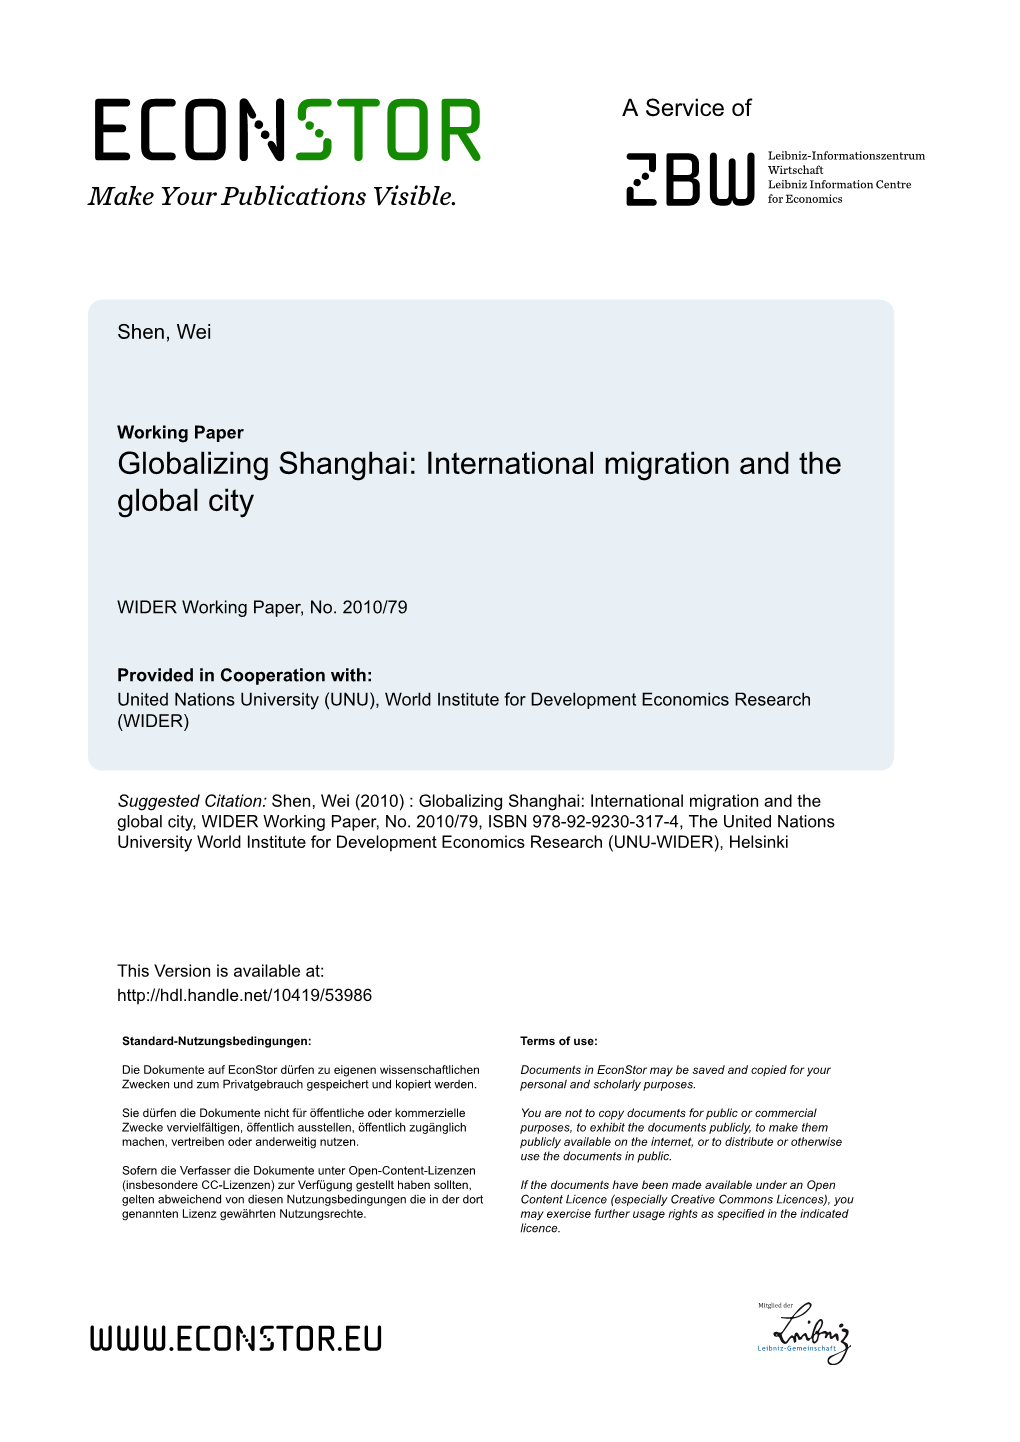 Globalizing Shanghai: International Migration and the Global City